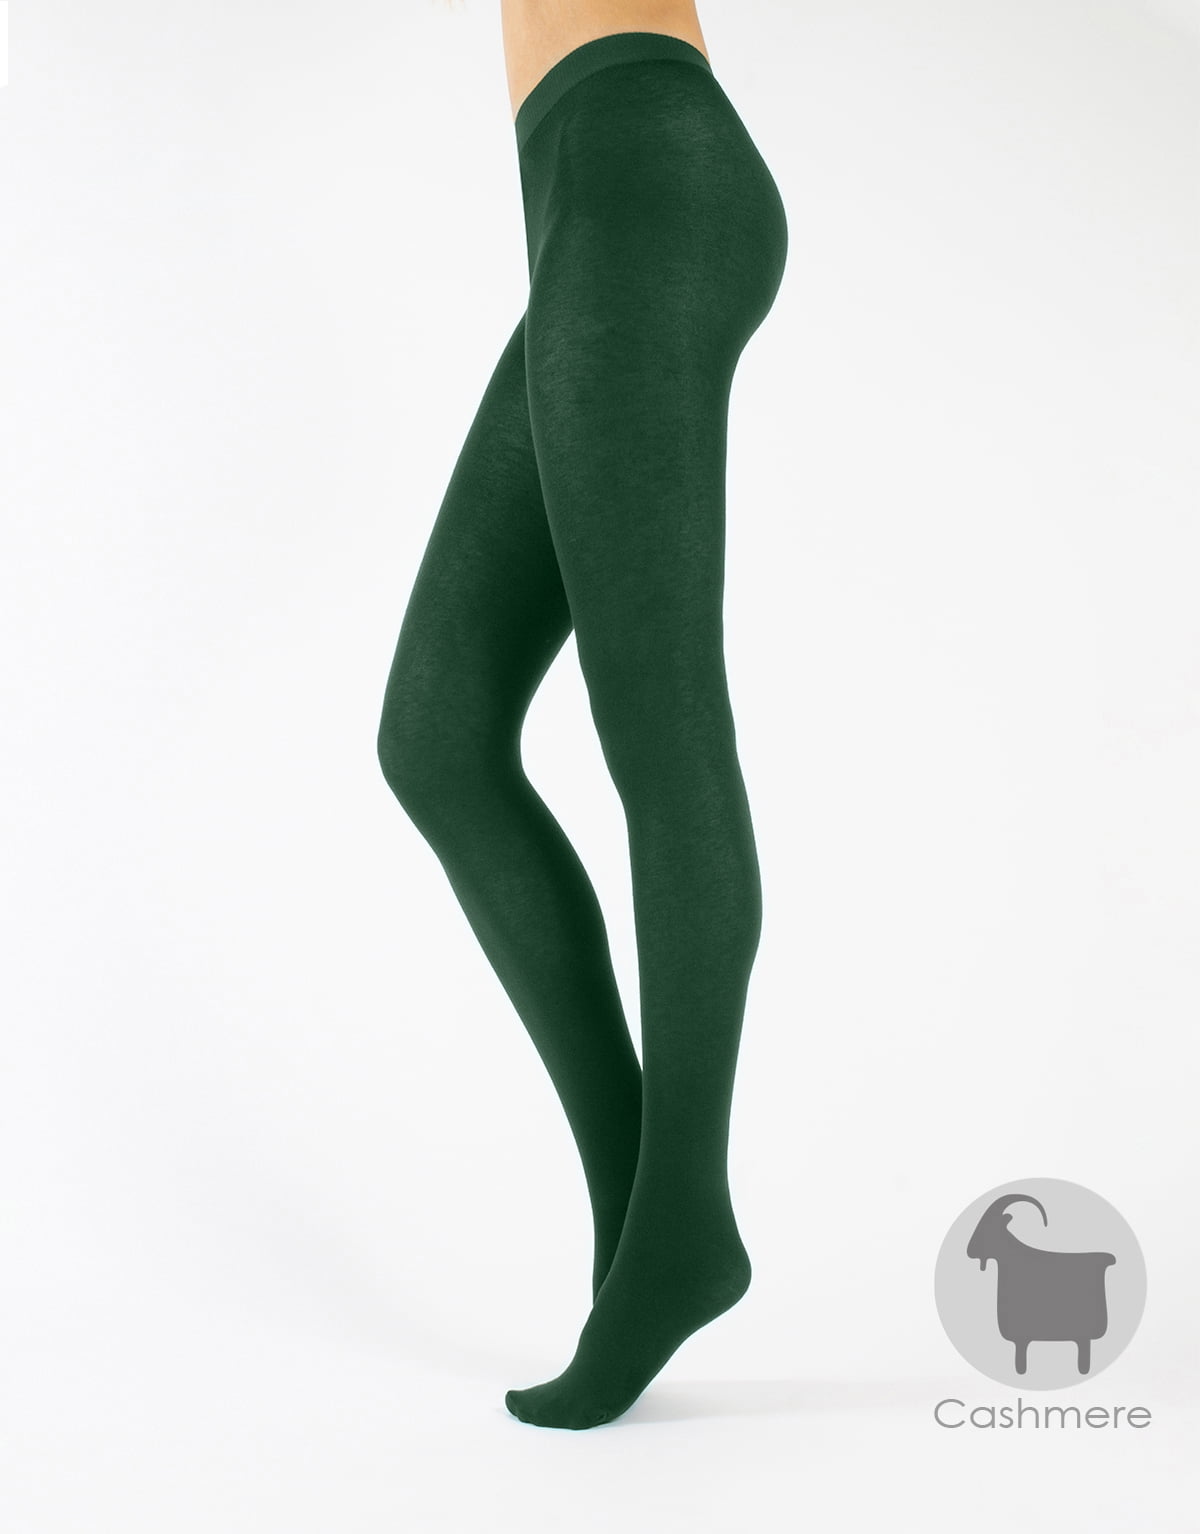 CALZITALY - Cashmere Wool Tights – Fleece Lined Warm Pantyhose for Women –  150 DEN (S, Mystic Green)